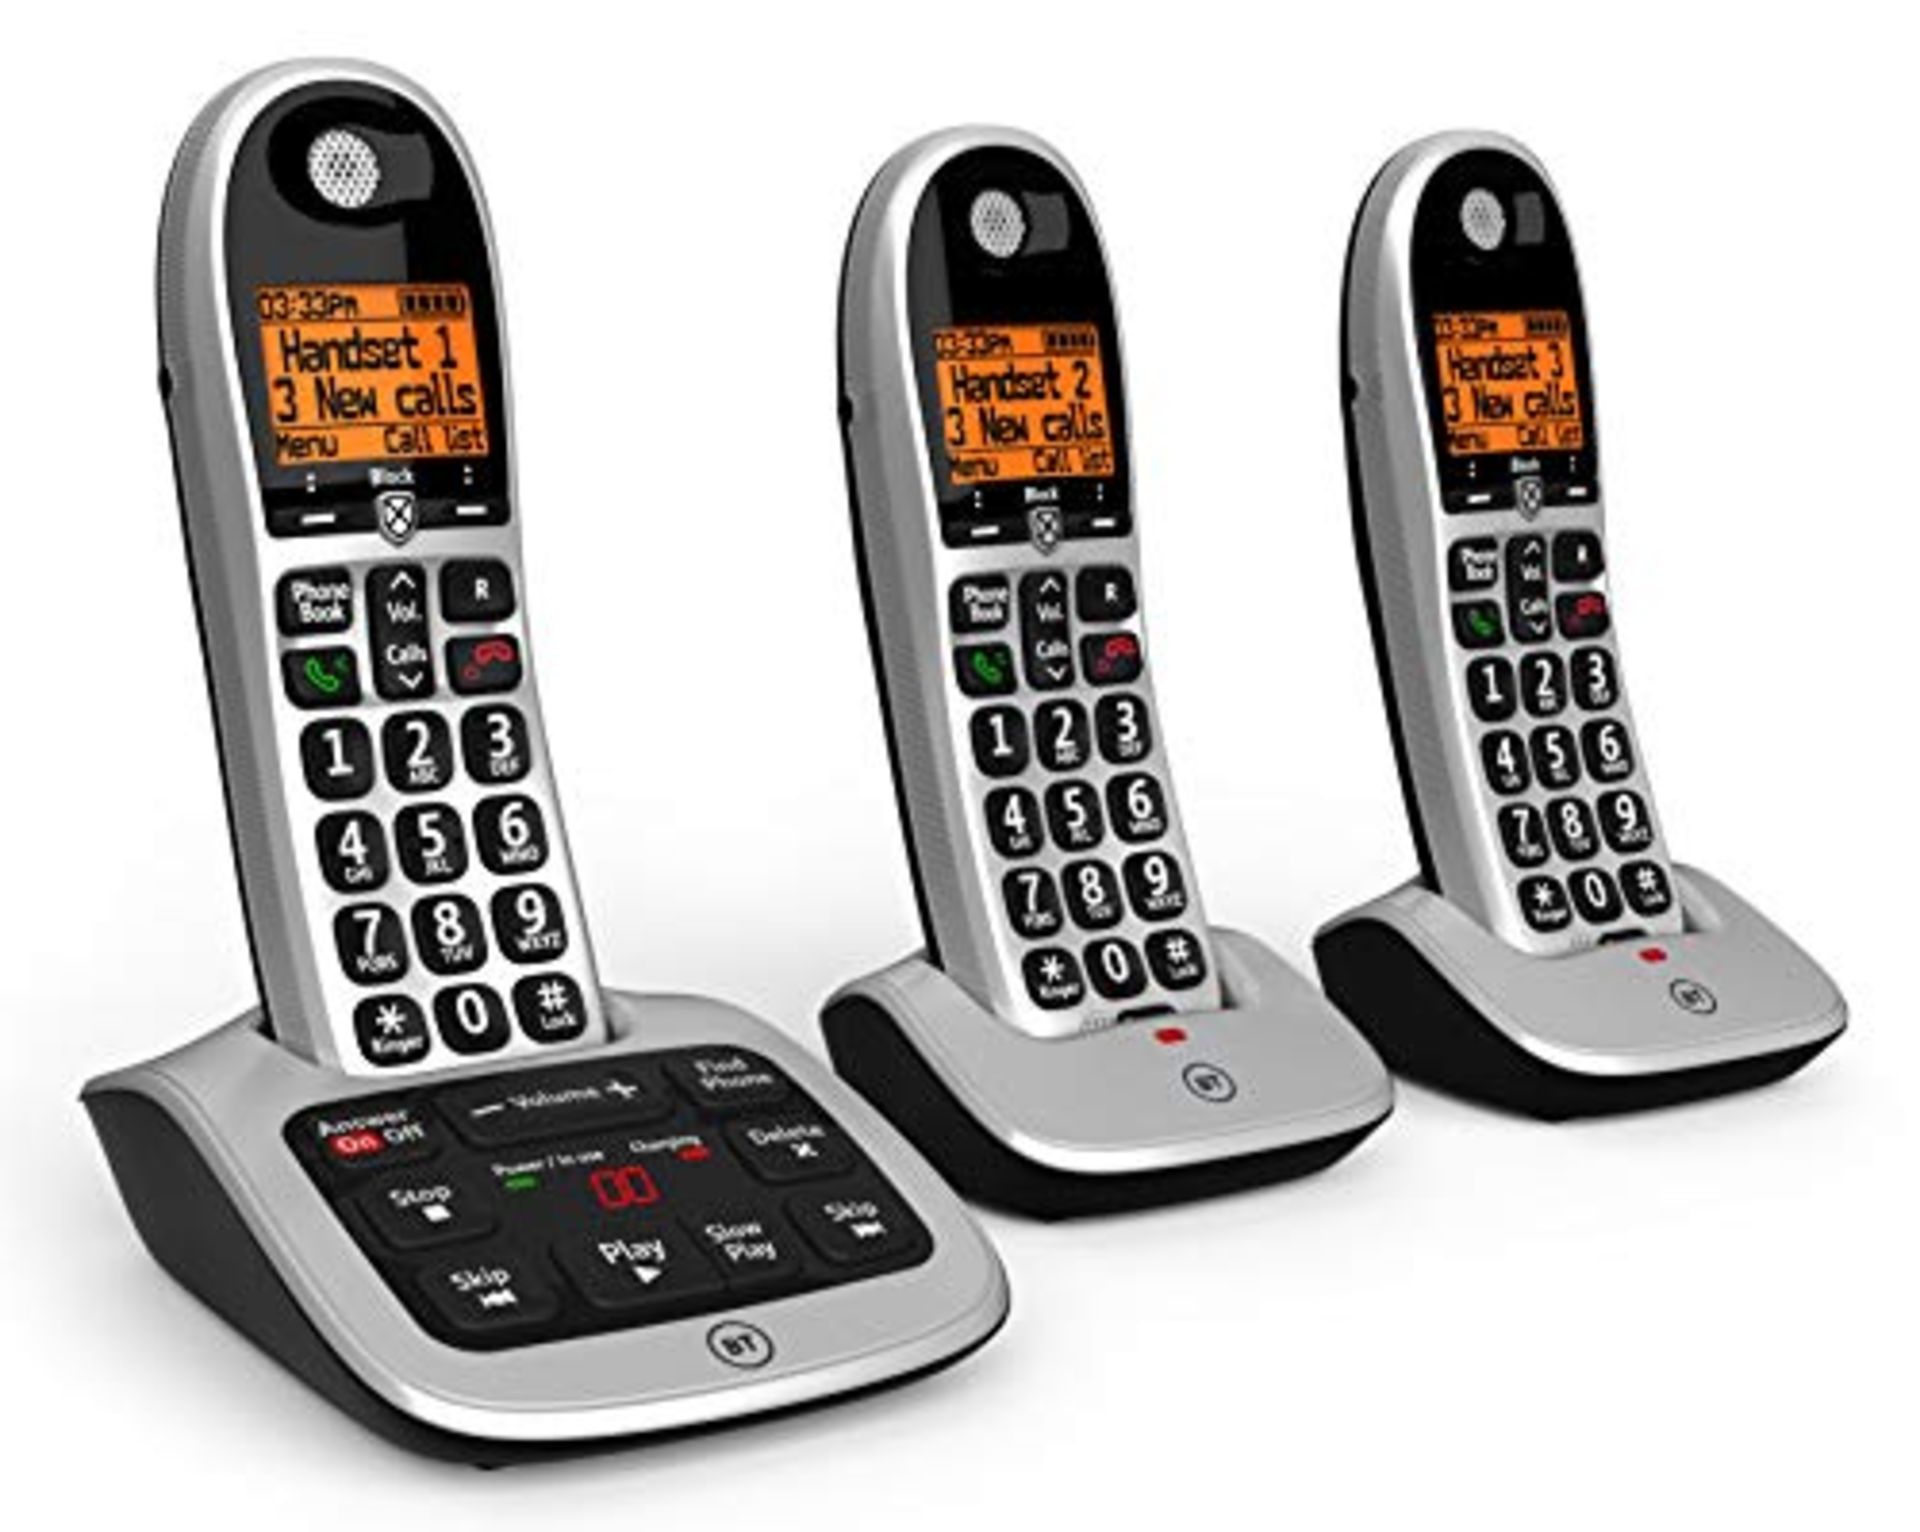 RRP £90.00 BT 4600 Cordless Landline House Phone with Big Buttons, Advanced Nuisance Call Blocker